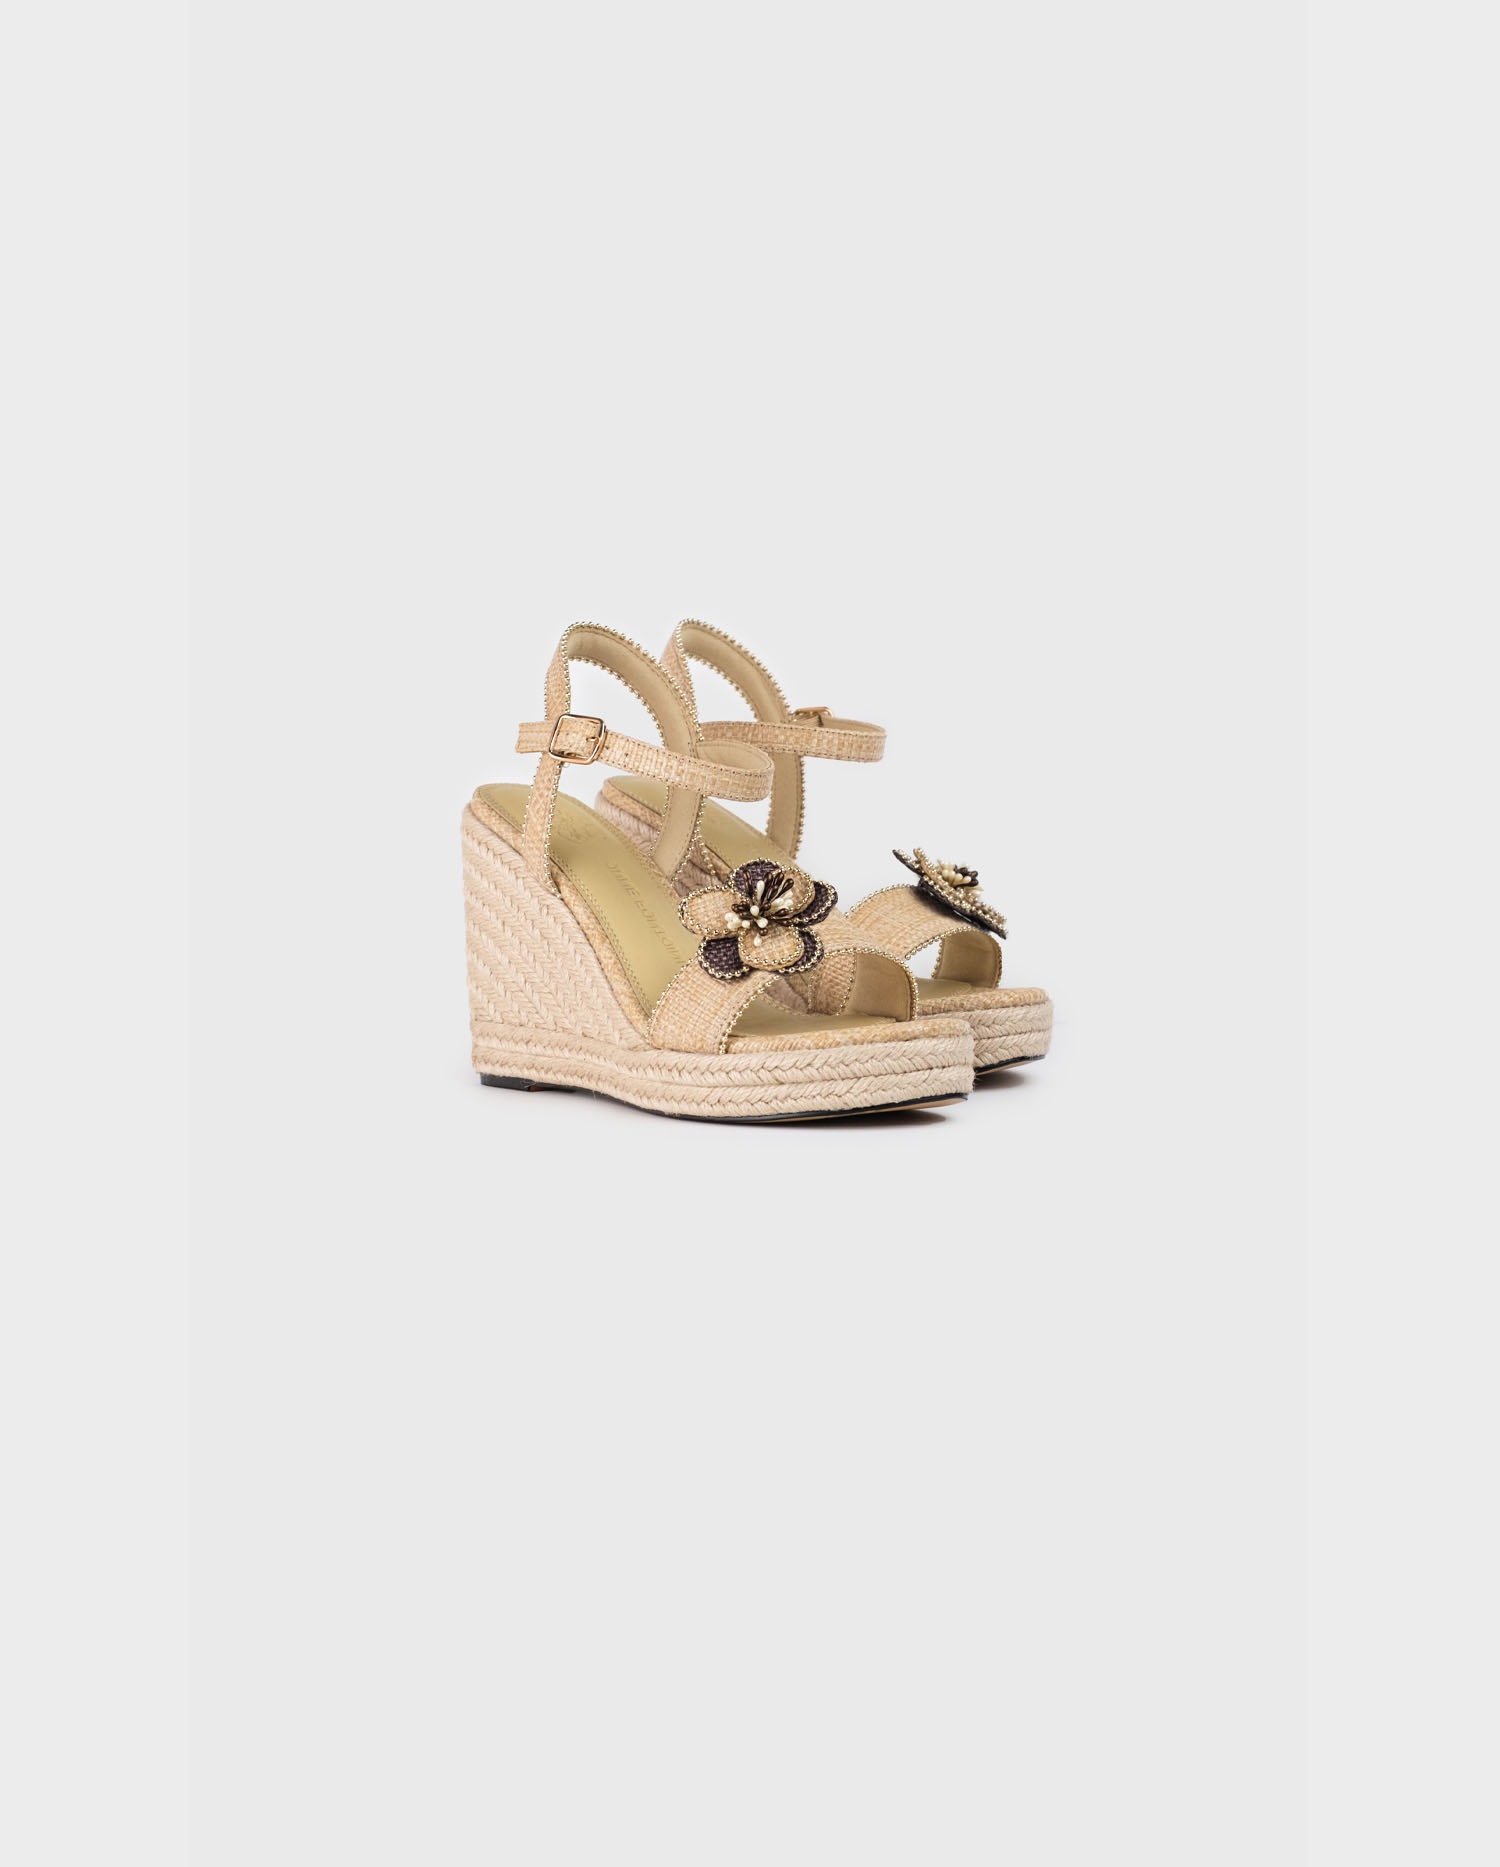 Discover the ONECA Natural Jute Espadrille Wedge Sandals